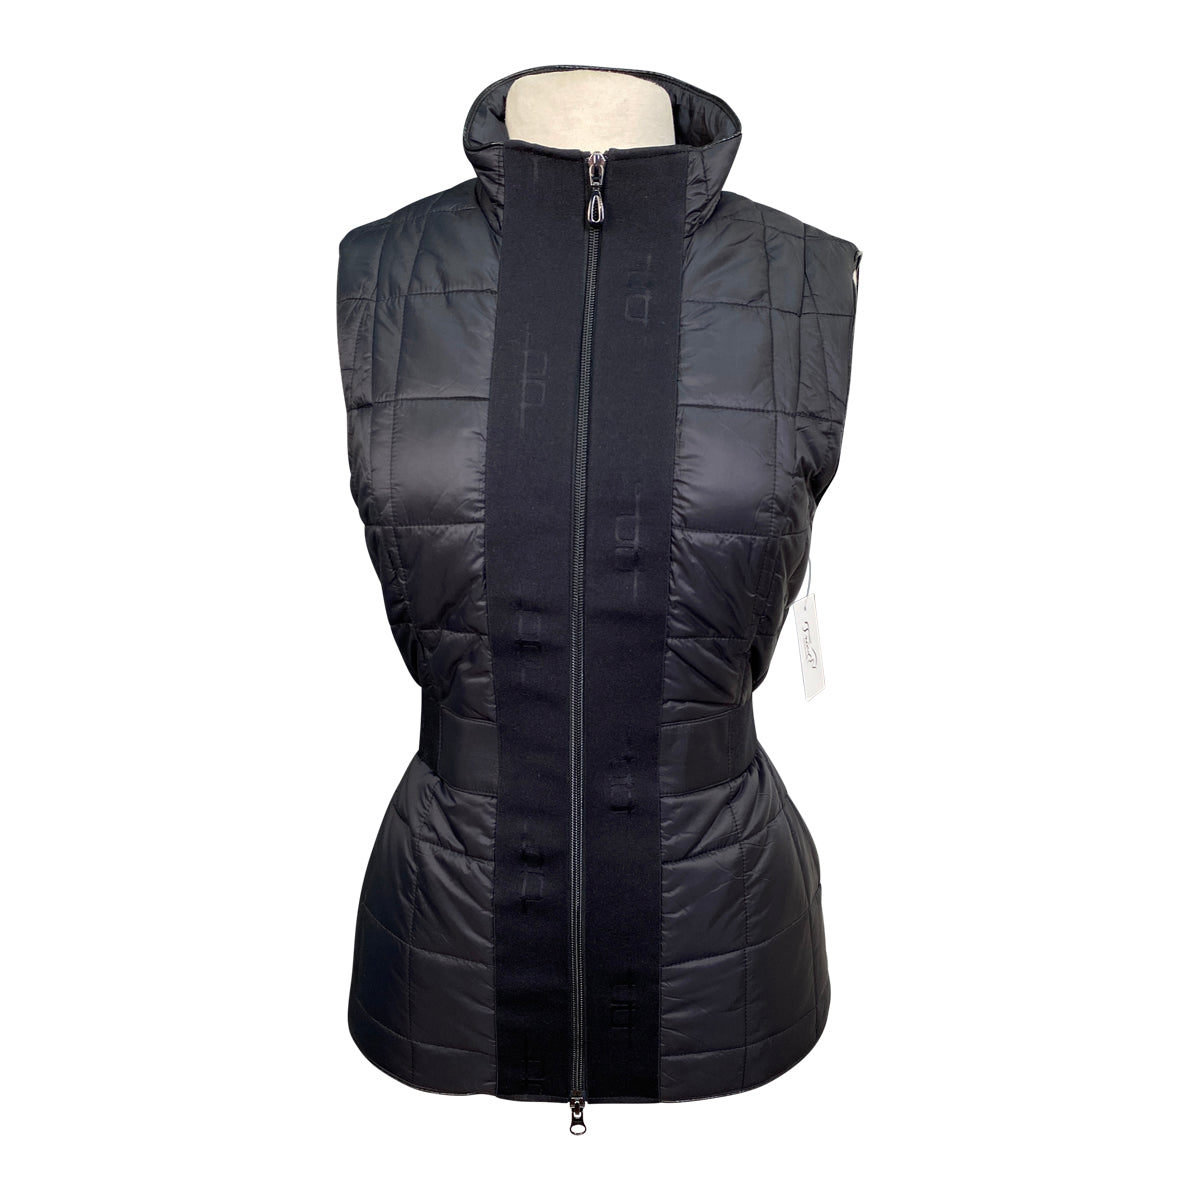 Alessandro Albanese 'Insula' Quilted Vest in Black